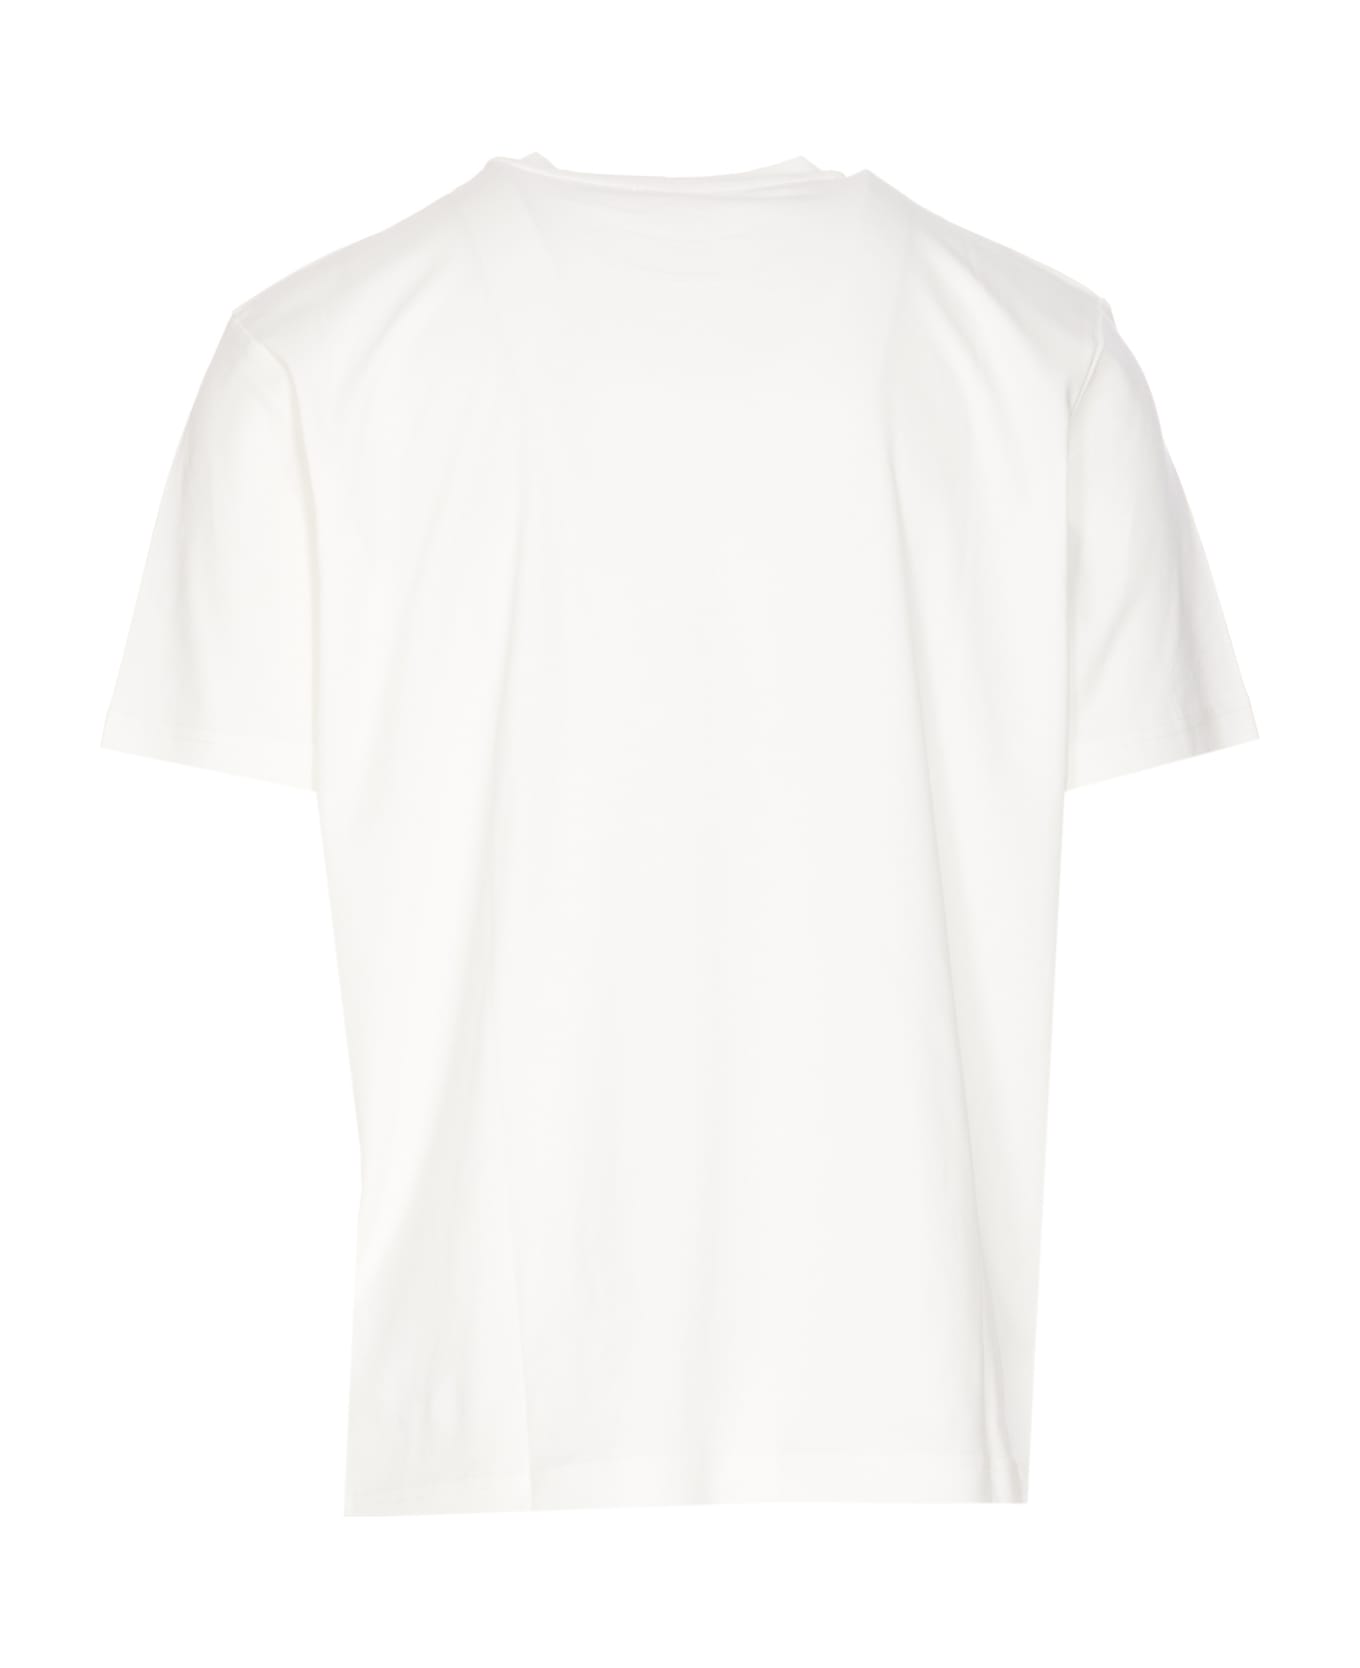 Diesel T-just Doval T-shirt - White